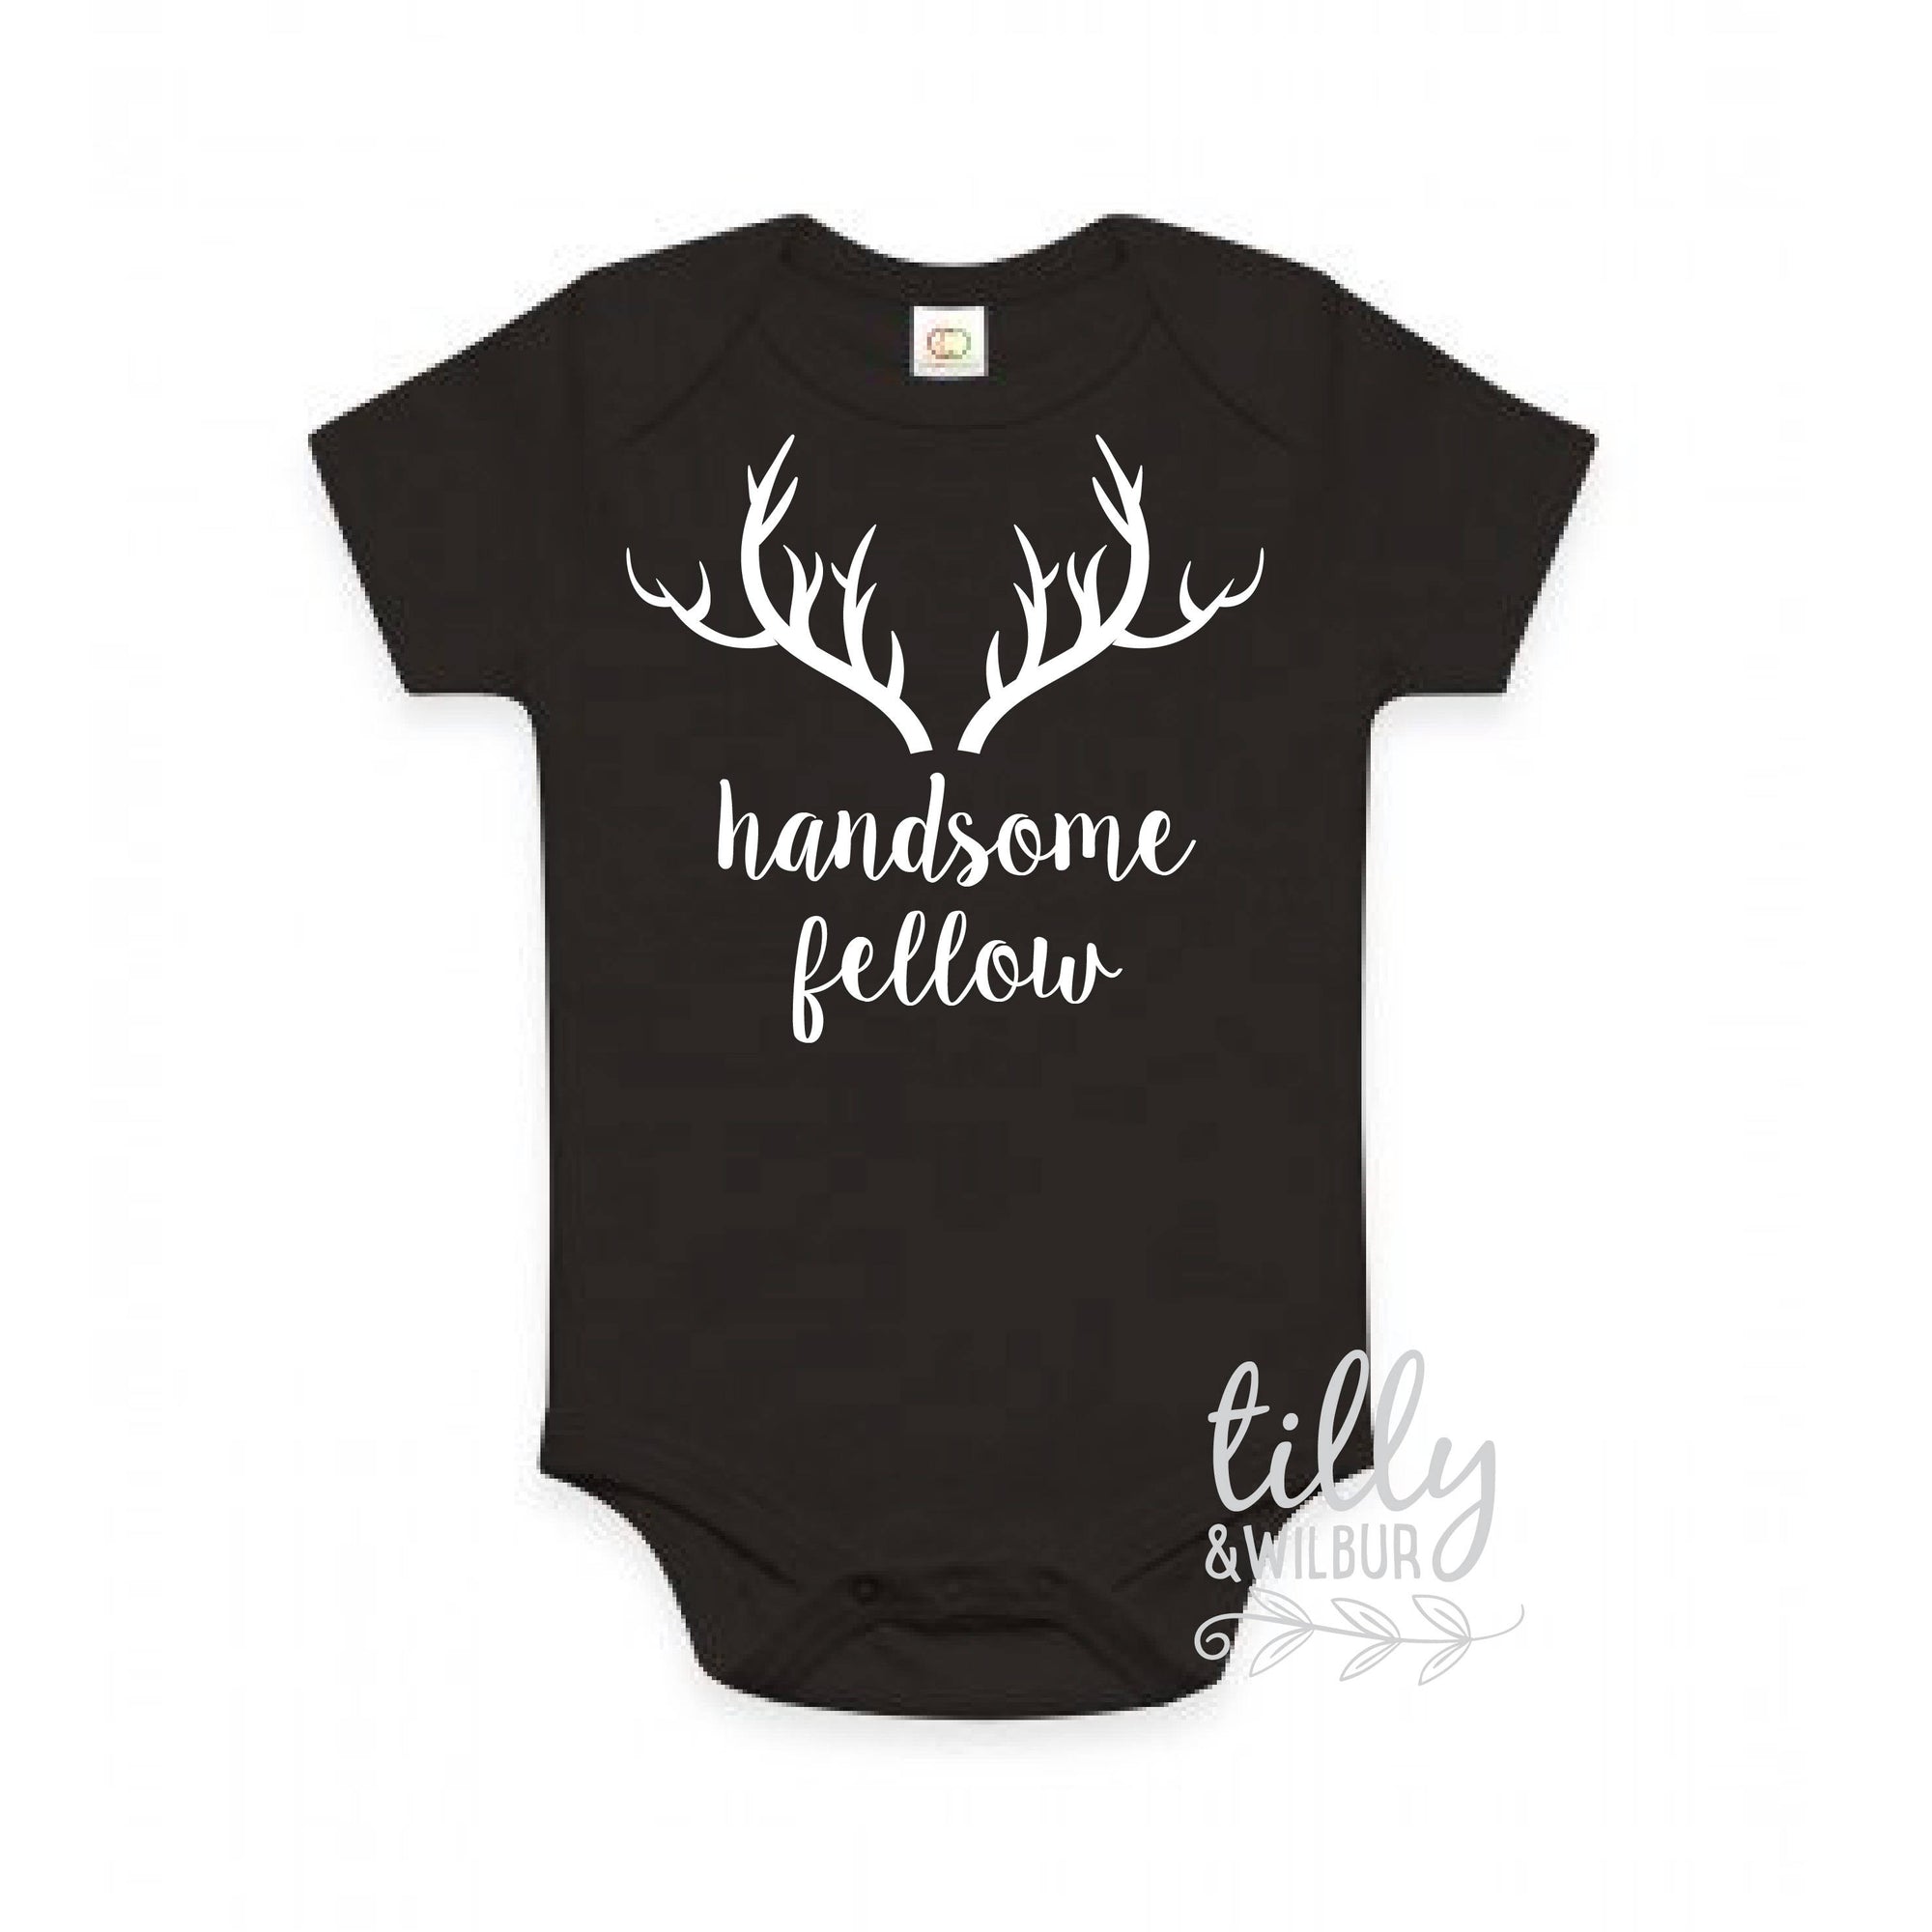 Handsome Fellow Baby Boy Outfit, Woodland Theme, Deer Antlers, Black Cotton Bodysuit, New baby Boy Gift, Boho Hipster Design